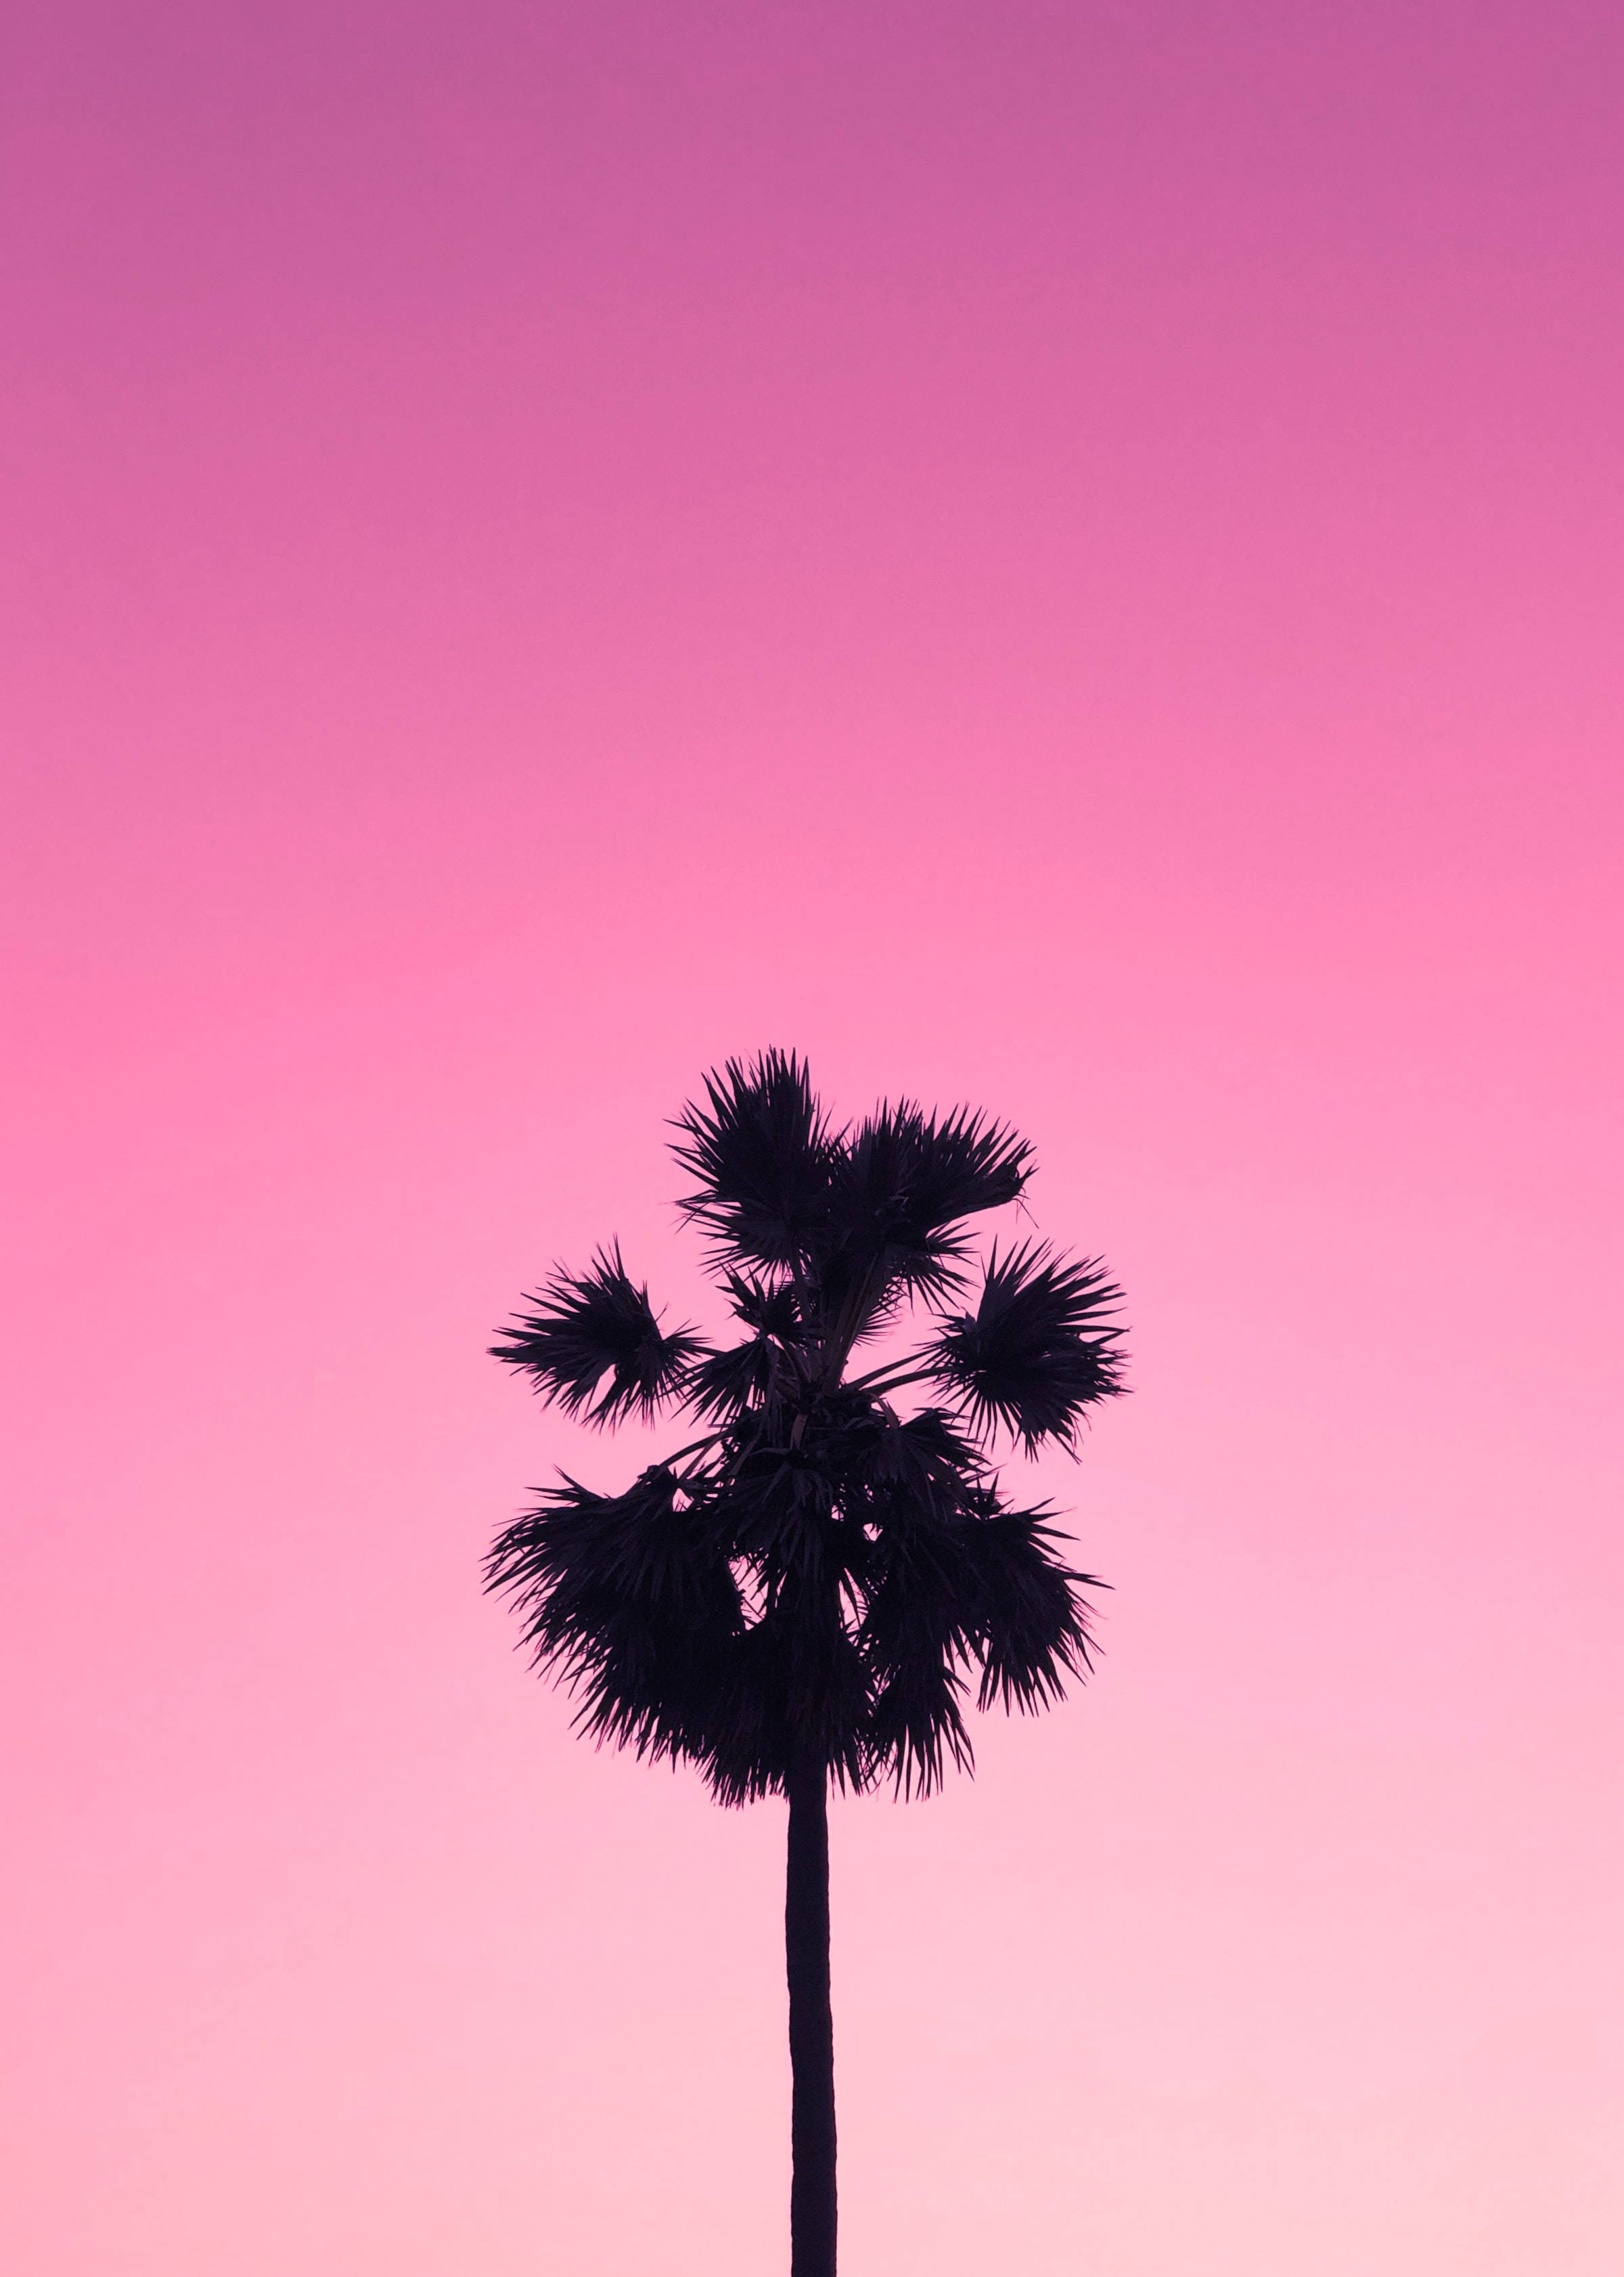 Cute Pink Aesthetic Sky Tree Silhouette Picture